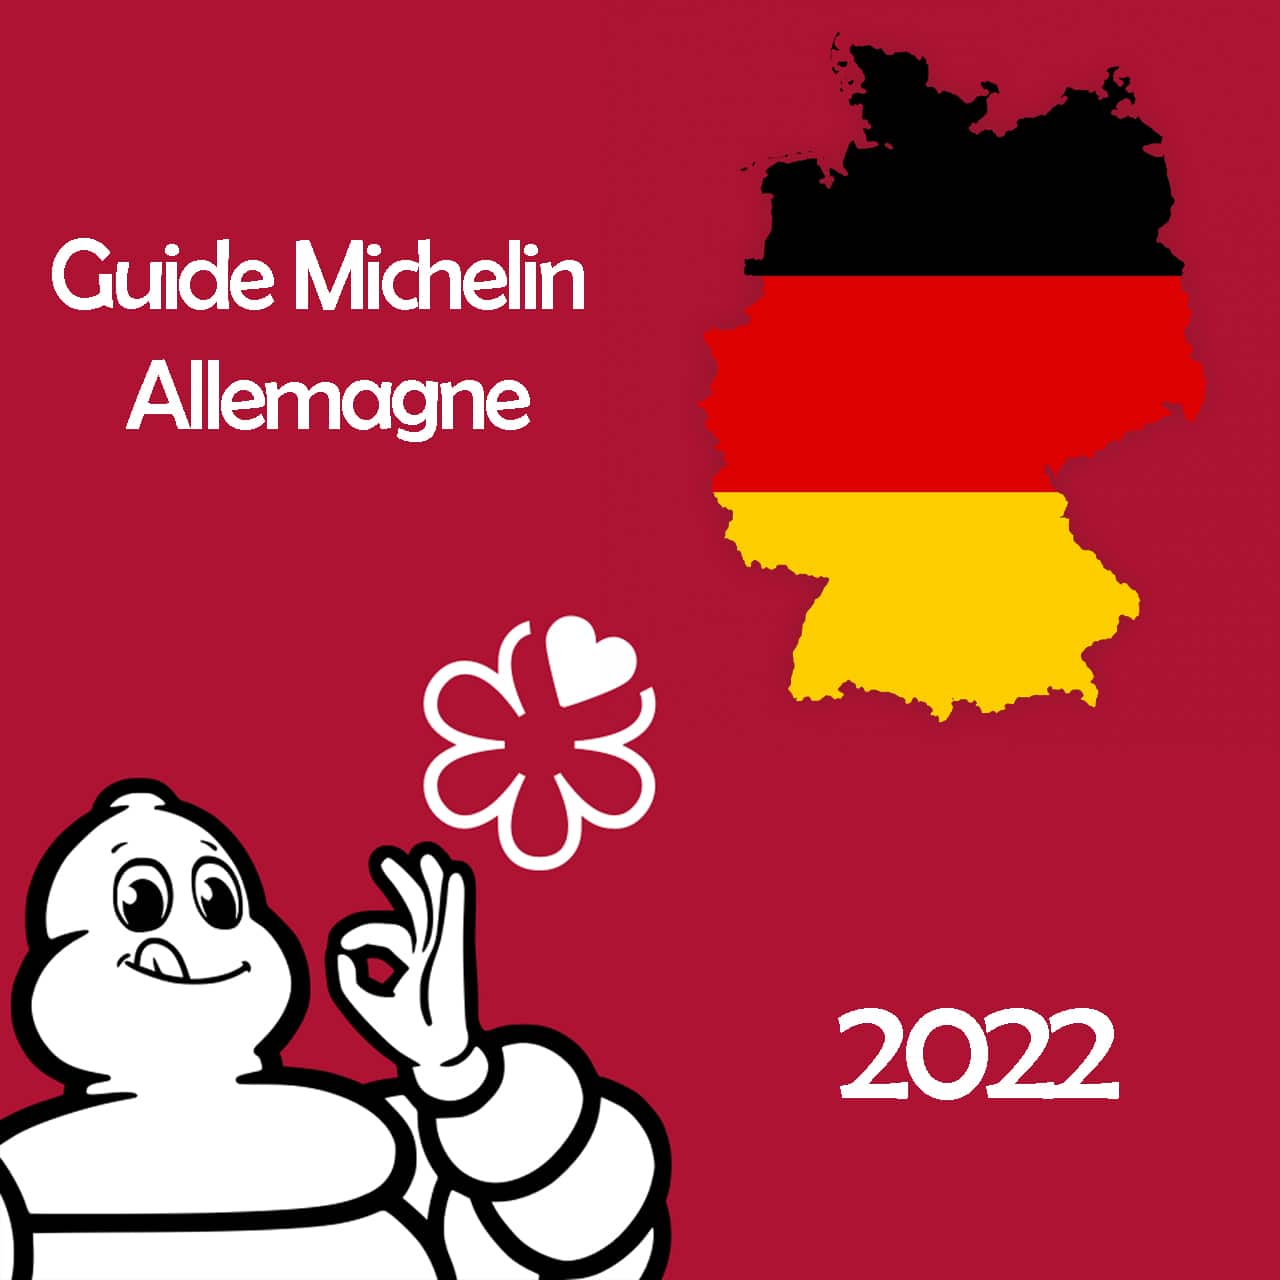 Guide Michelin Allemagne 2022